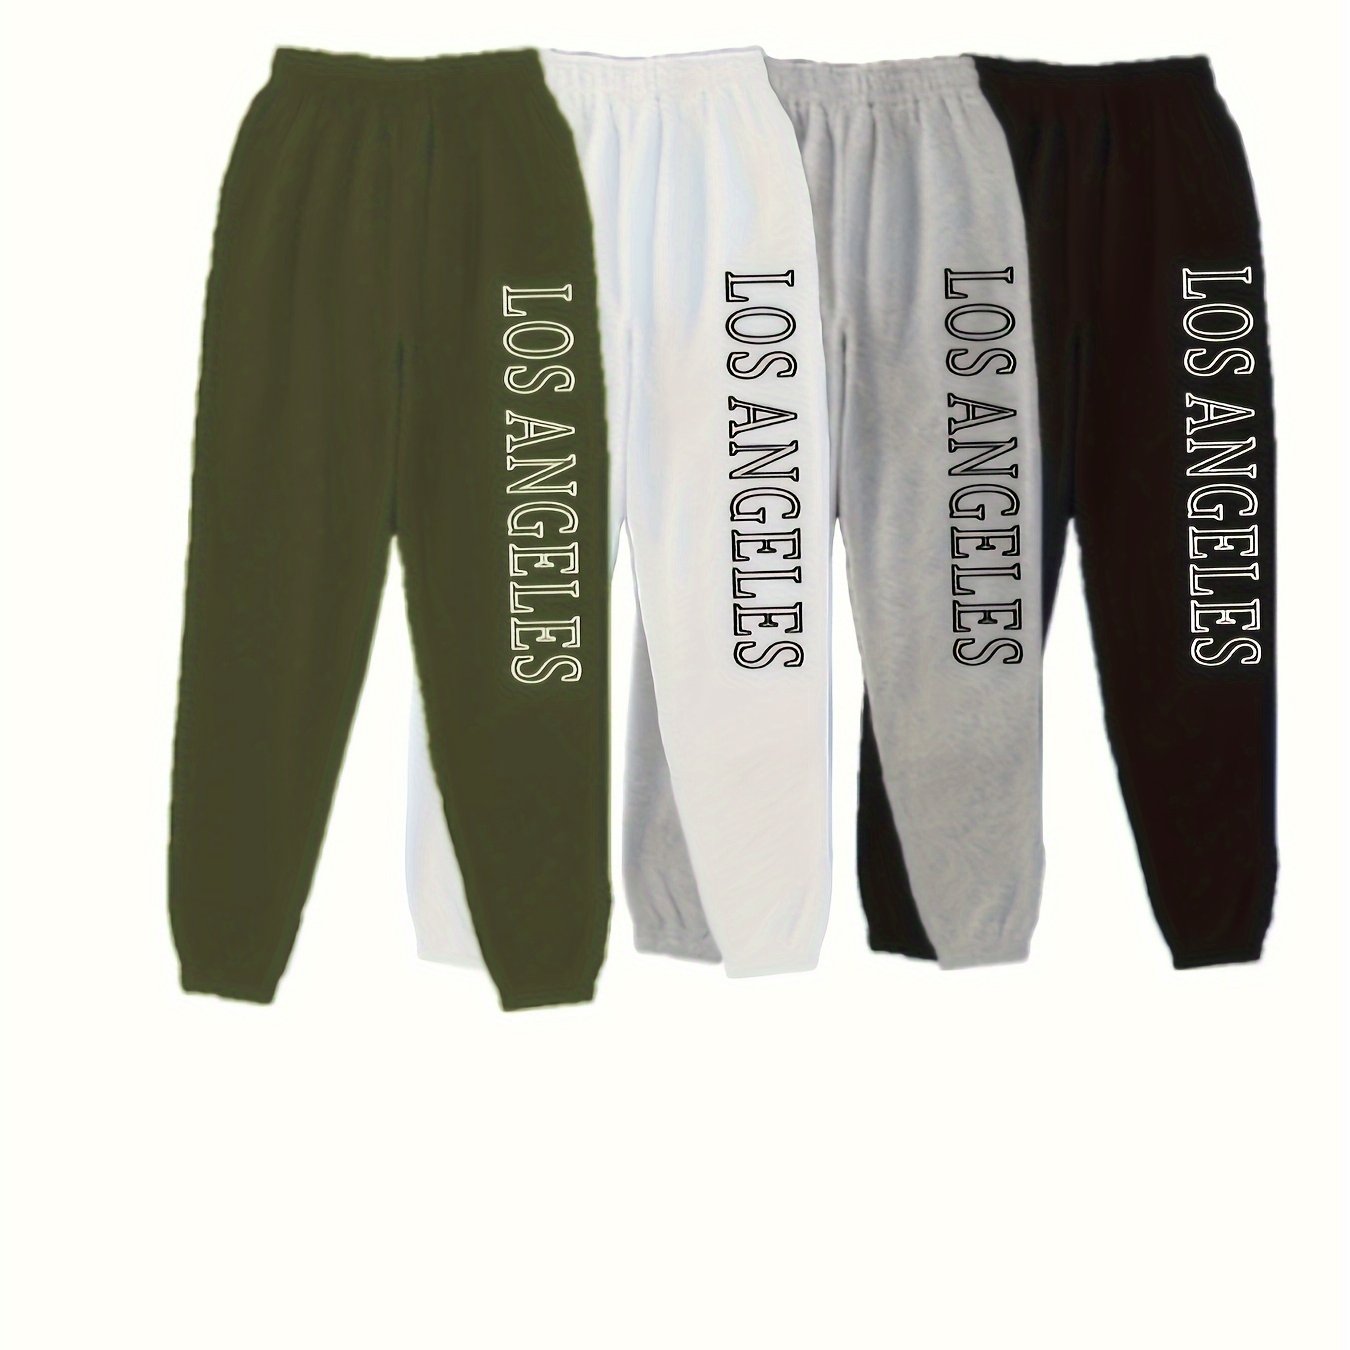 Letter Print Jogger Sweatpants 4 Pack, Casual Slant Pocket Sporty Pants For Fall & Winter, Women's Clothing